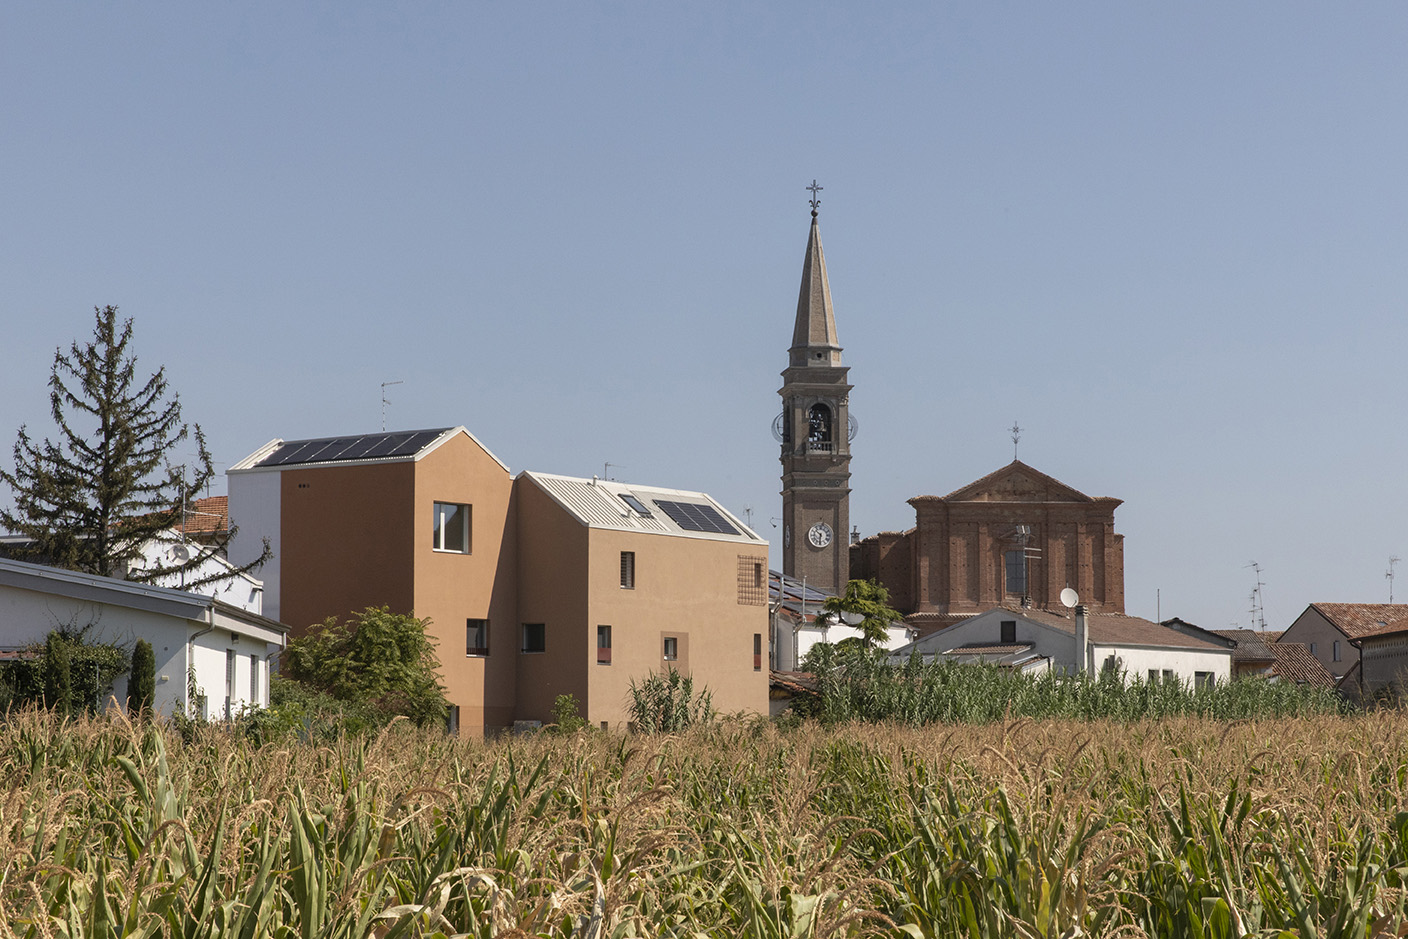 A dialogue between architecture and landscape. Senior Housing and Public Hall in the Lombardy countryside